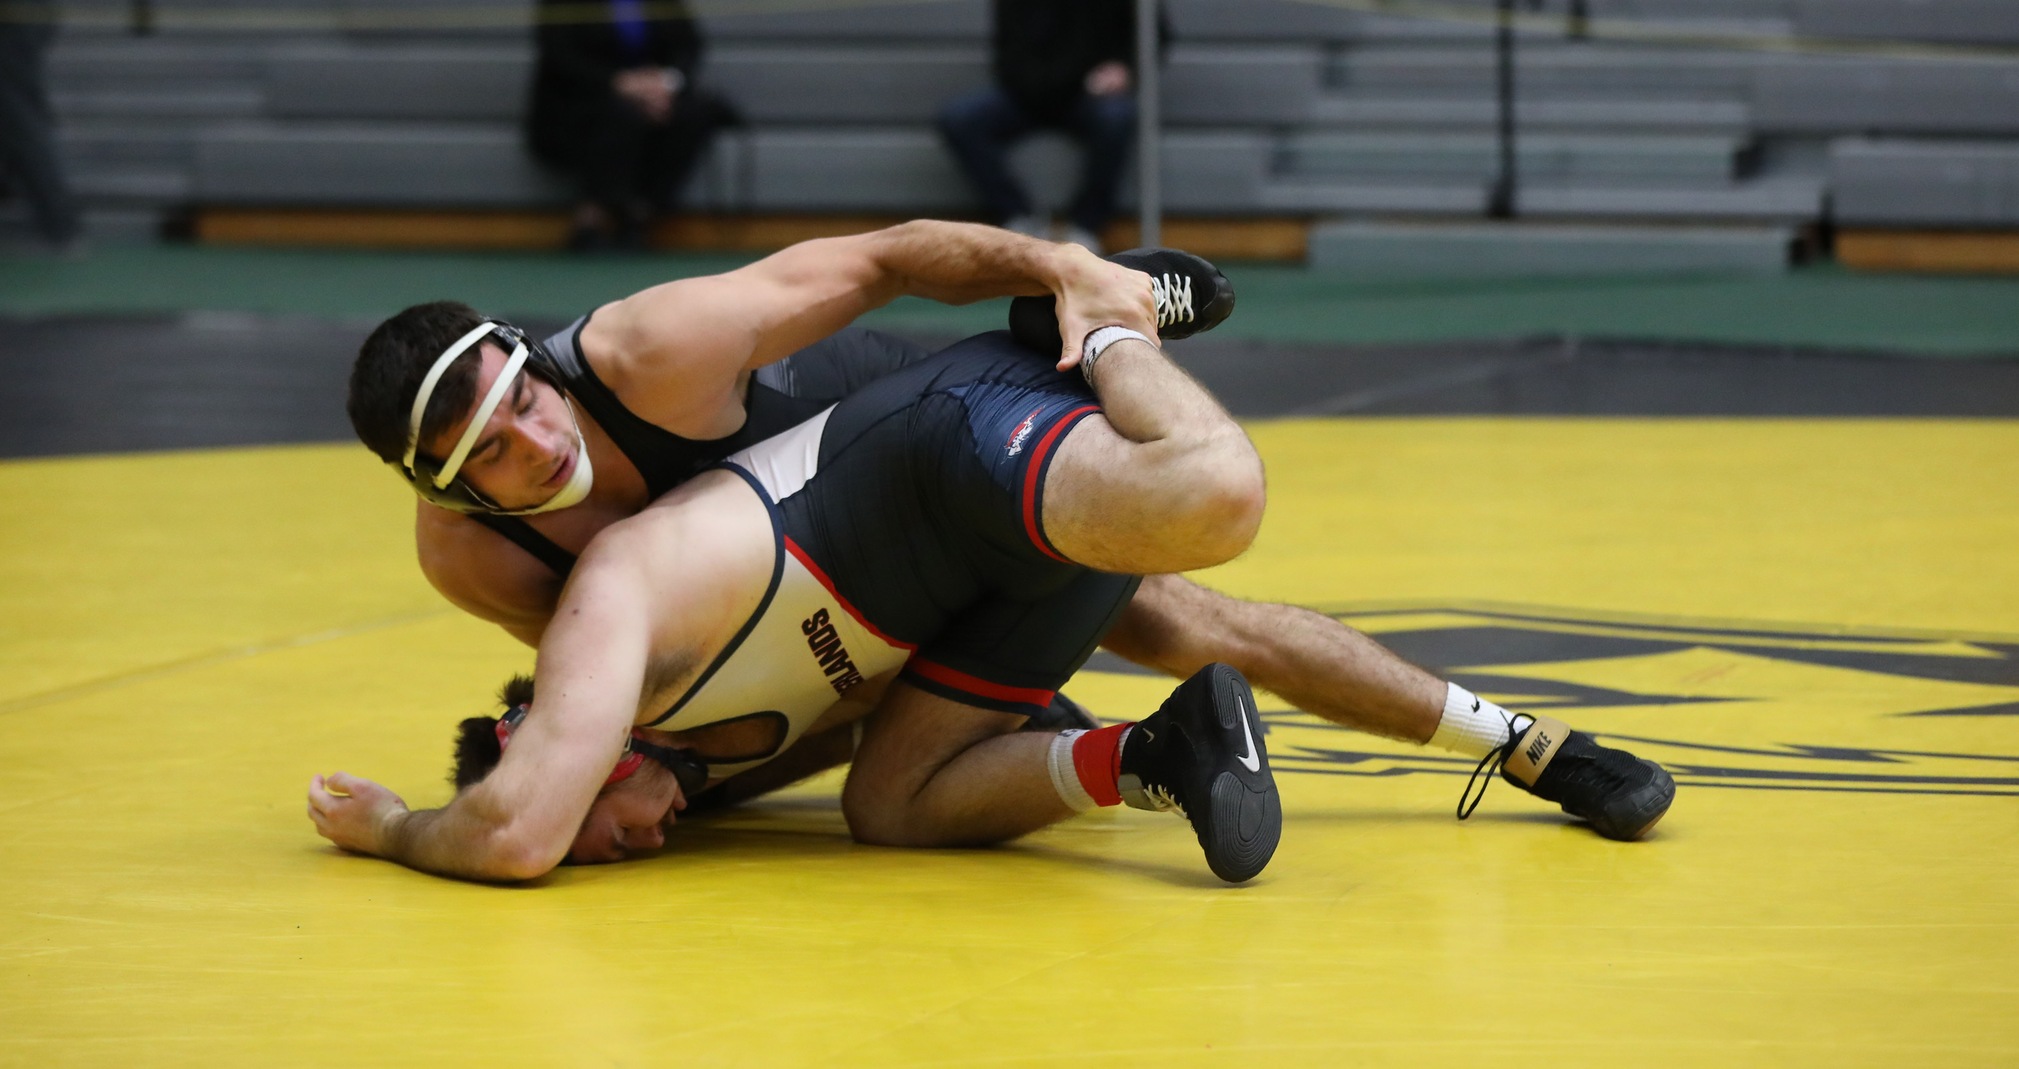 John DePersia of the Titans placed second in the 184-pound weight class at the Dan Gable Open.